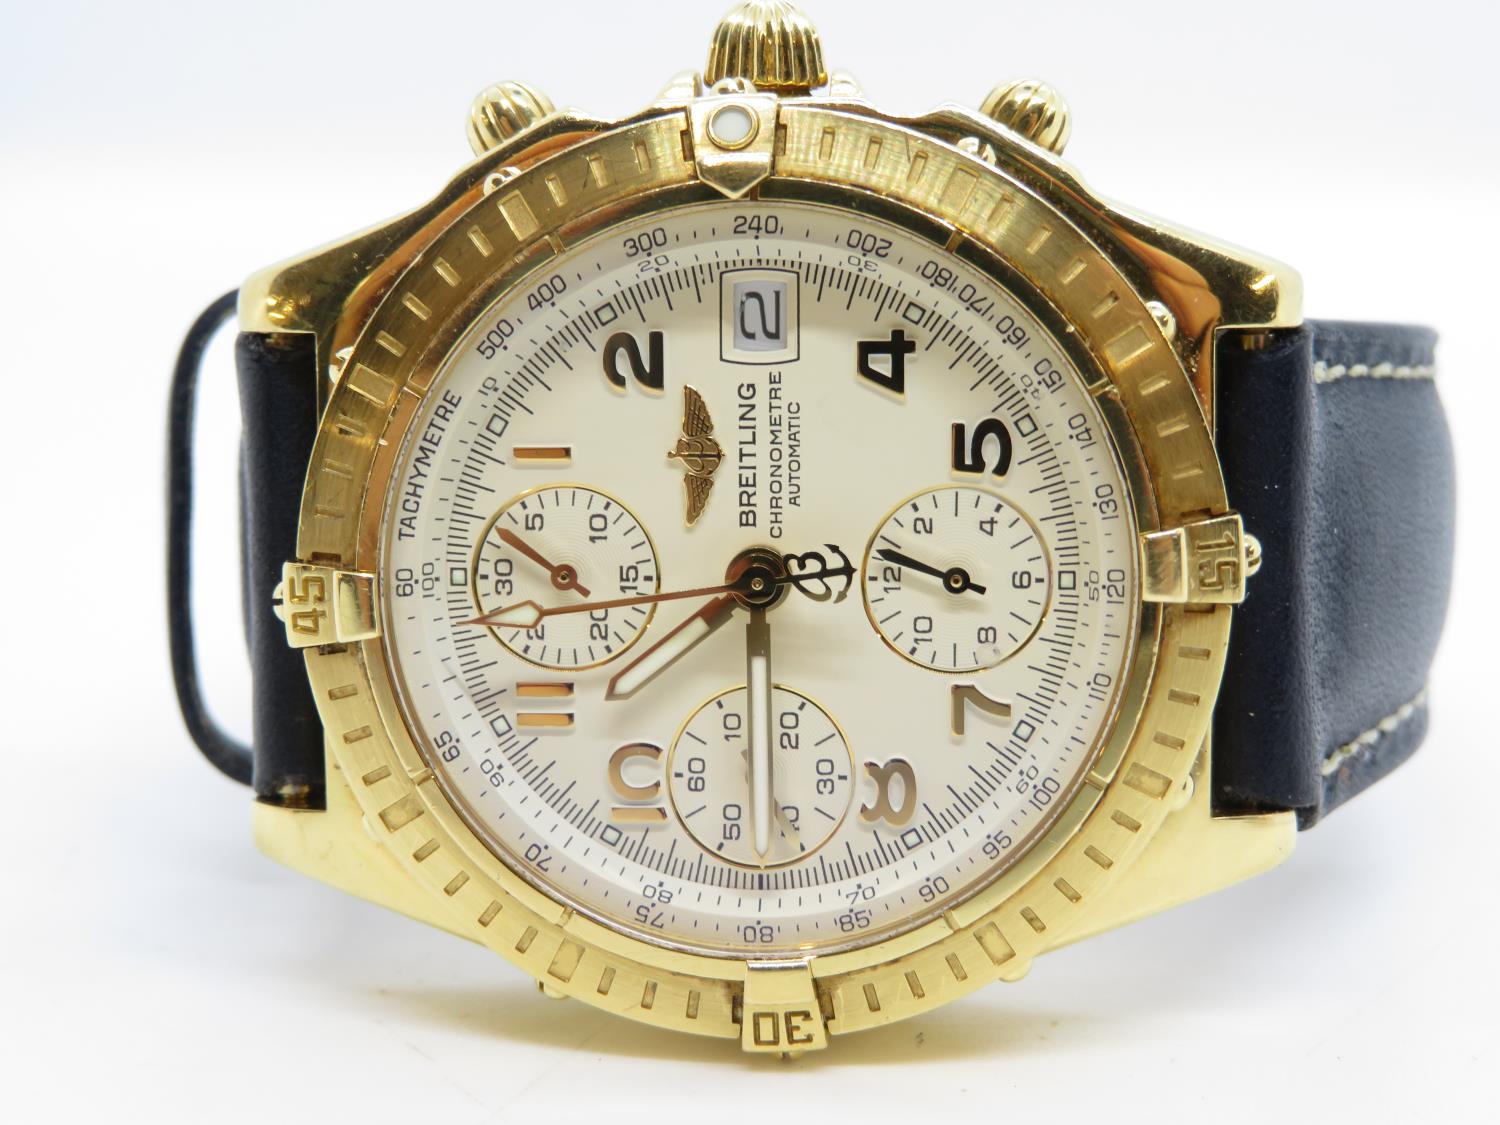 Breitling 18ct gold chronograph fully working automatic watch replacement Breitling strap K13352 - Image 2 of 4